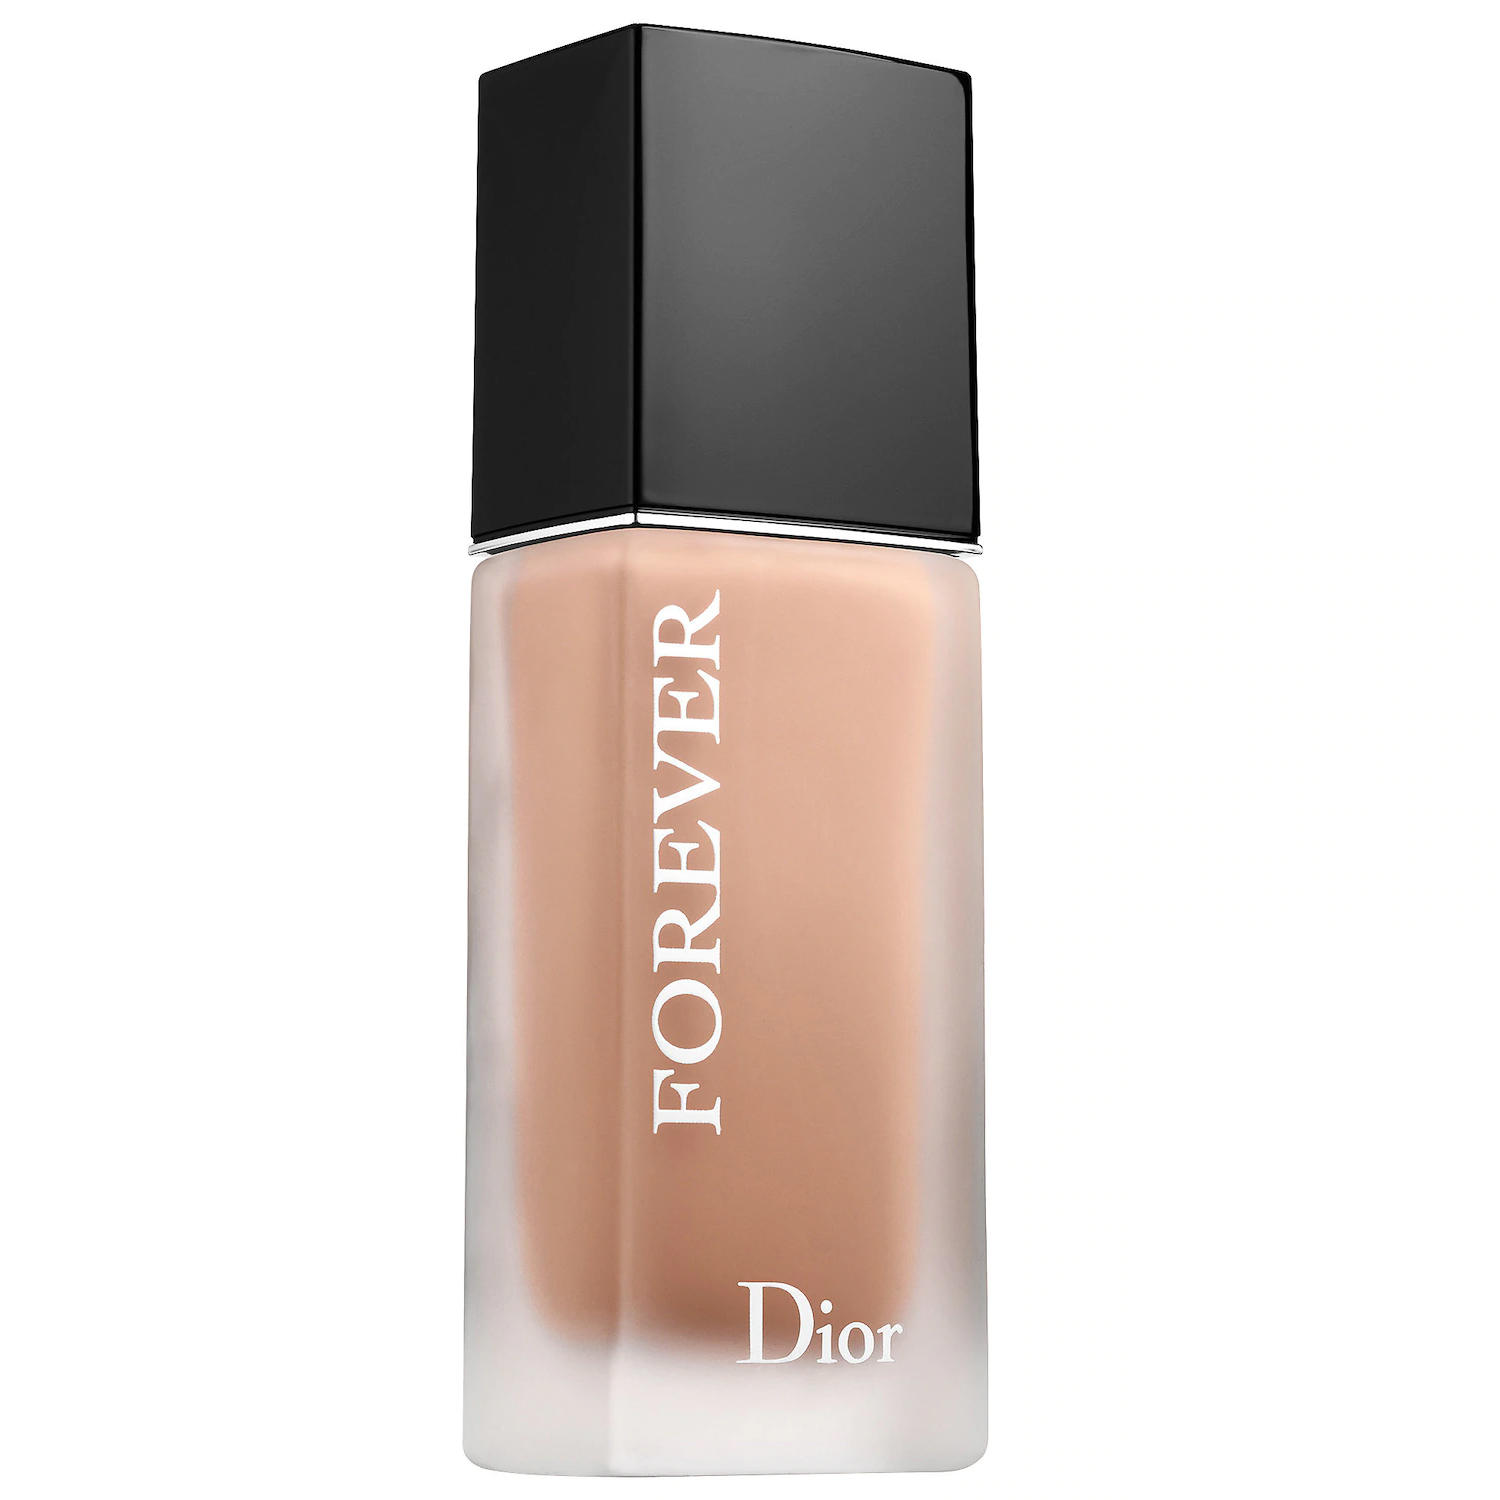 Dior Forever 24H Wear High Perfection Matte Foundation 1.5N